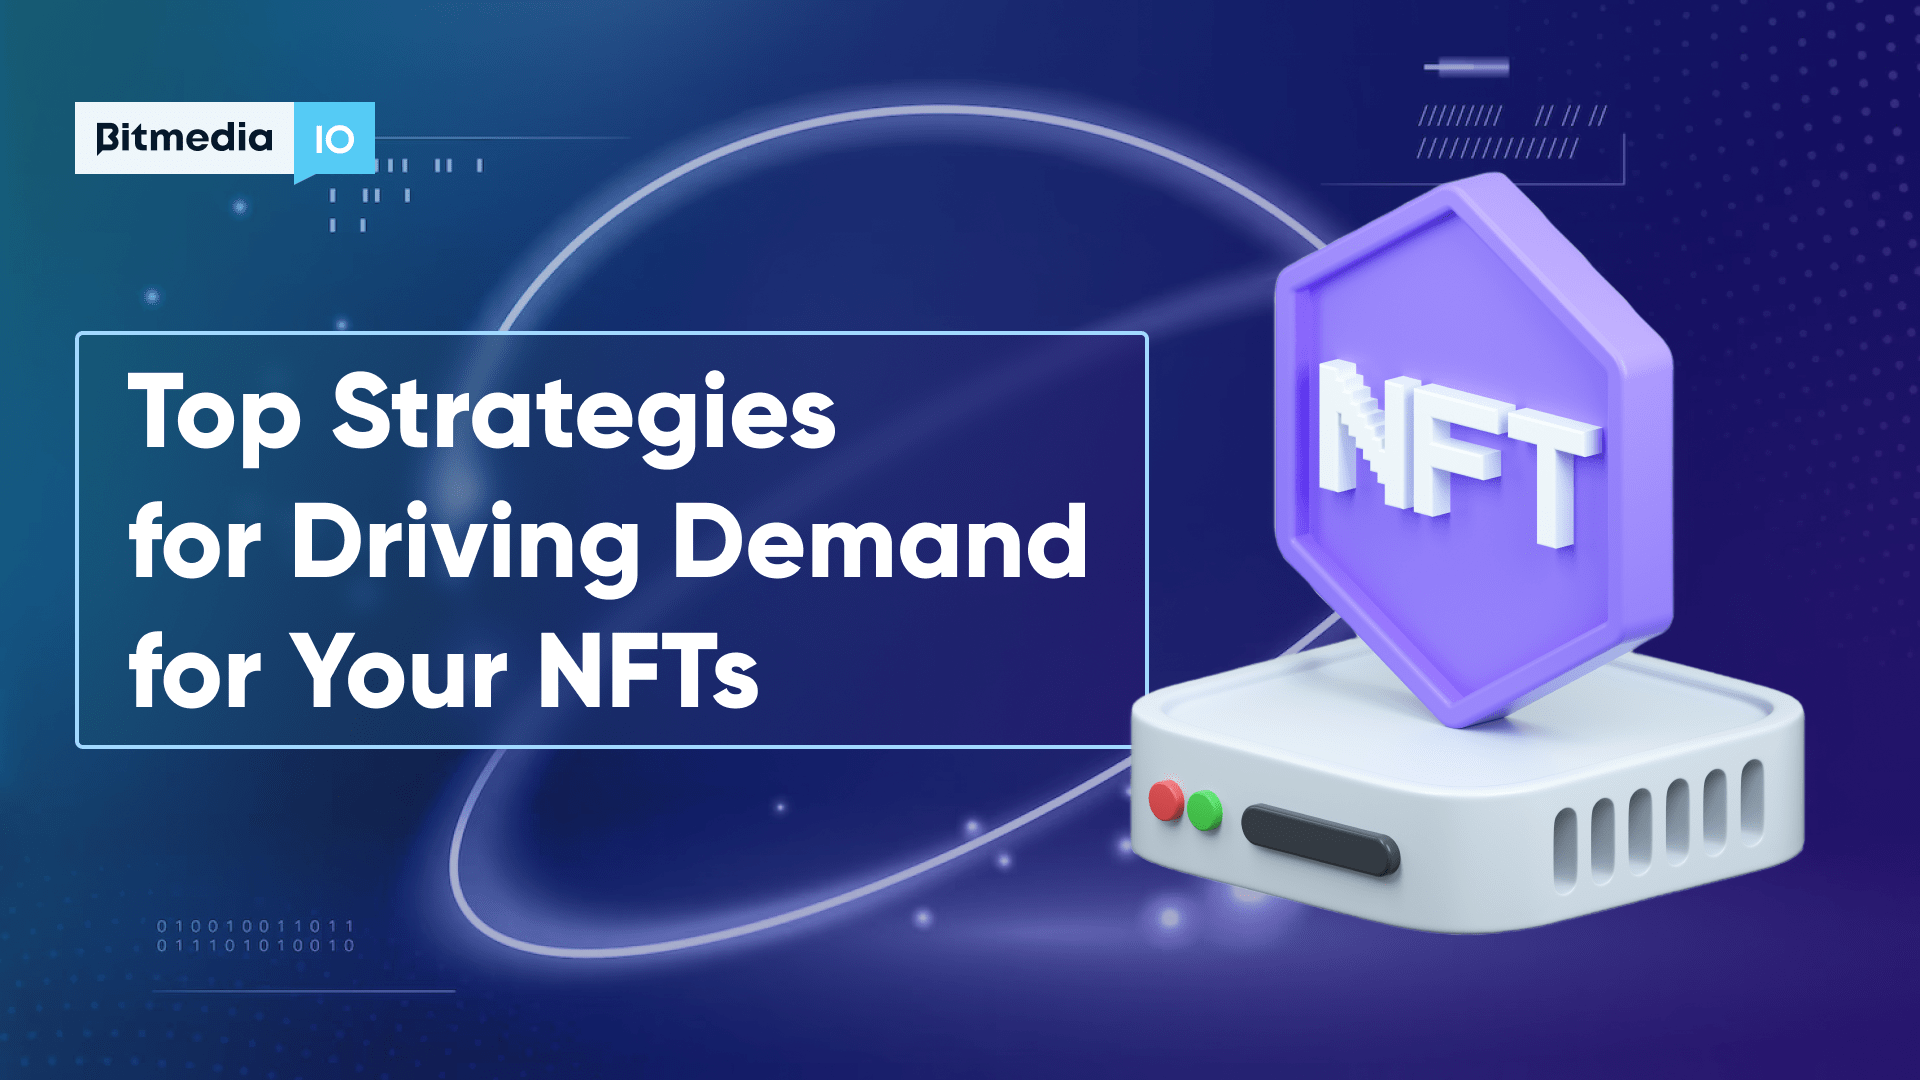 Top Strategies for Driving Demand for Your NFTs